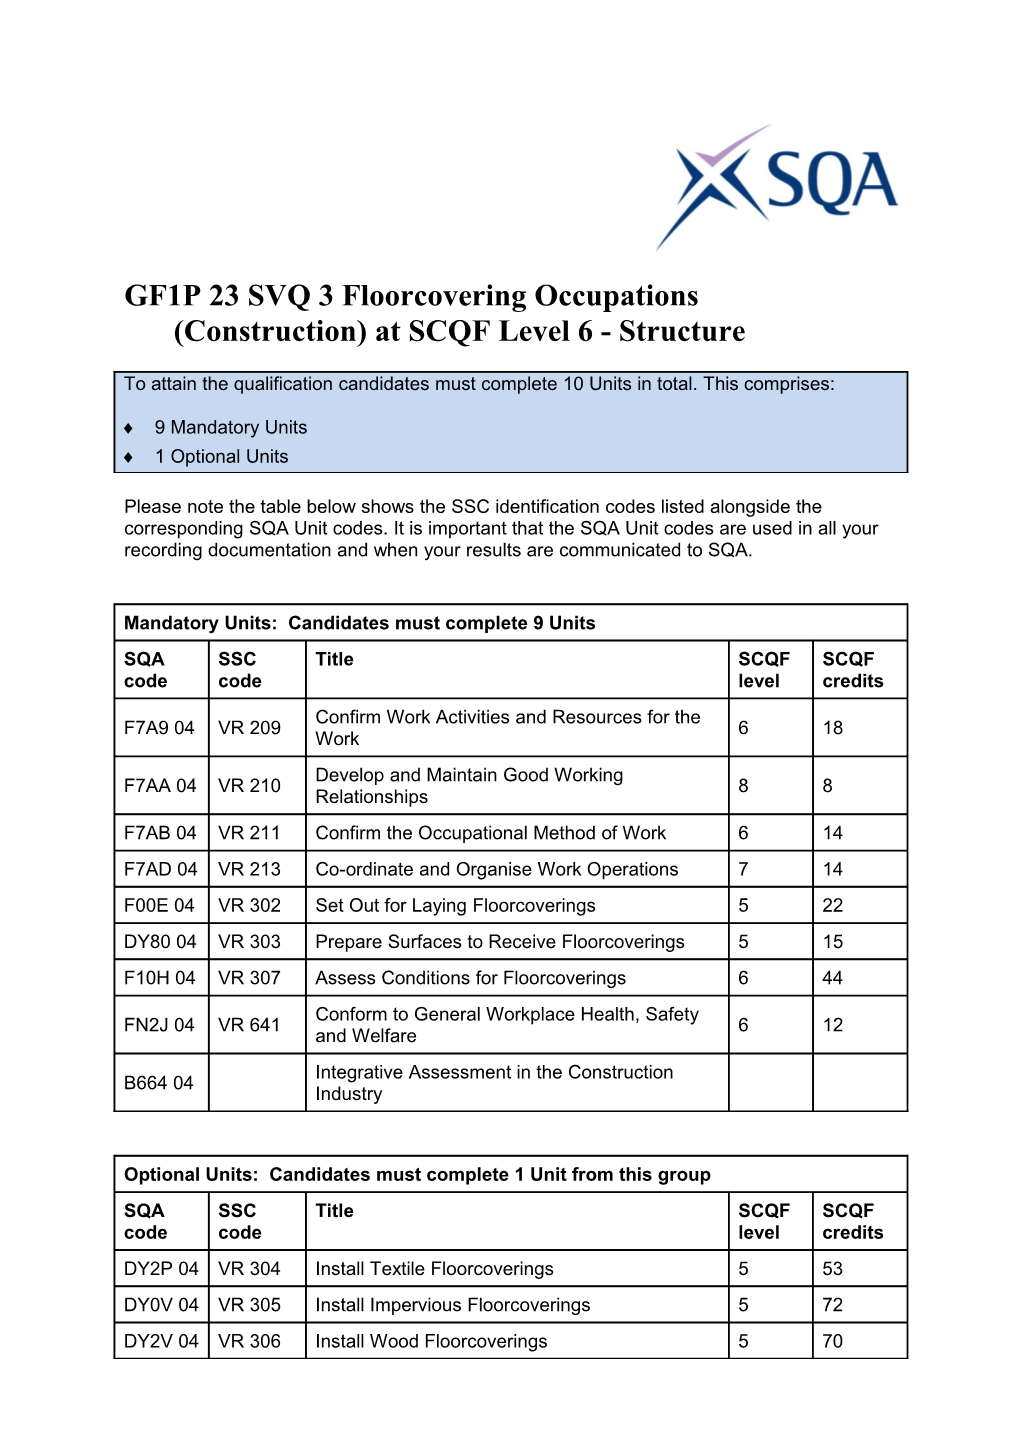 GF1P 23 SVQ 3 Floorcovering Occupations (Construction) at SCQF Level 6 - Structure